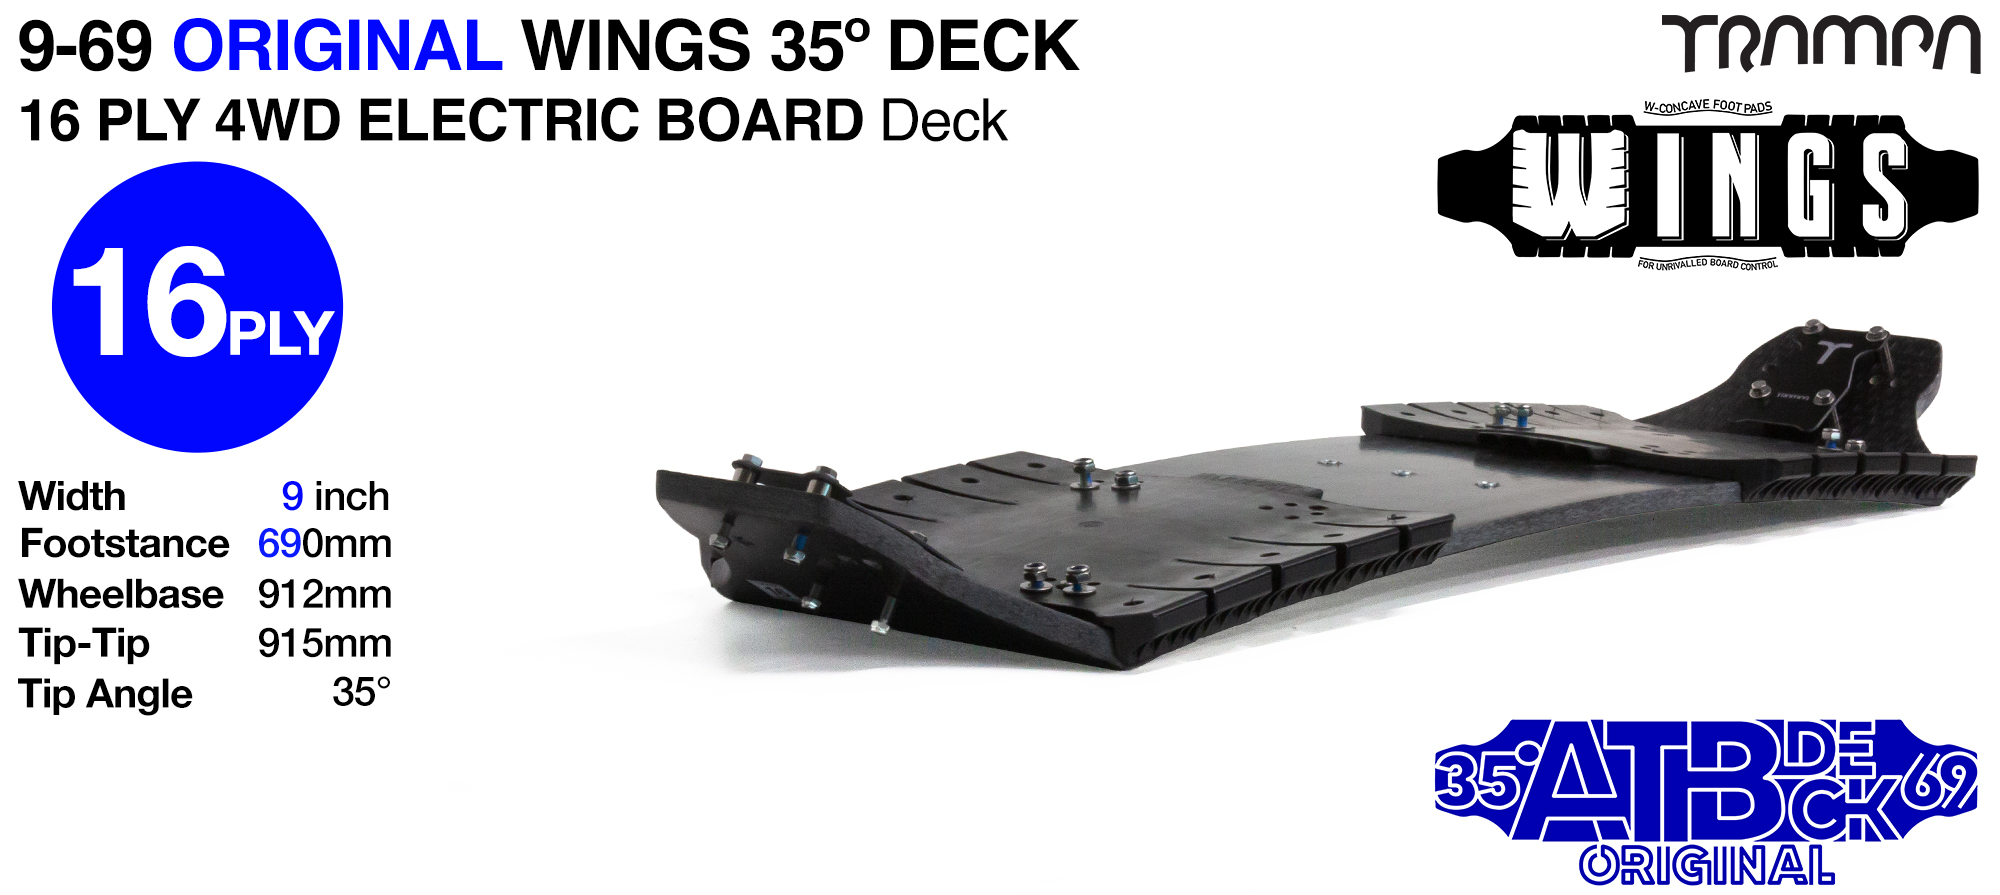 TRAMPA 35° 9/69 4WD Mountainboard Deck with WINGS - WINGS give safe cable routing, add W Shaped concave & the increase the width of the deck from 9 to 10 Inches - 16ply